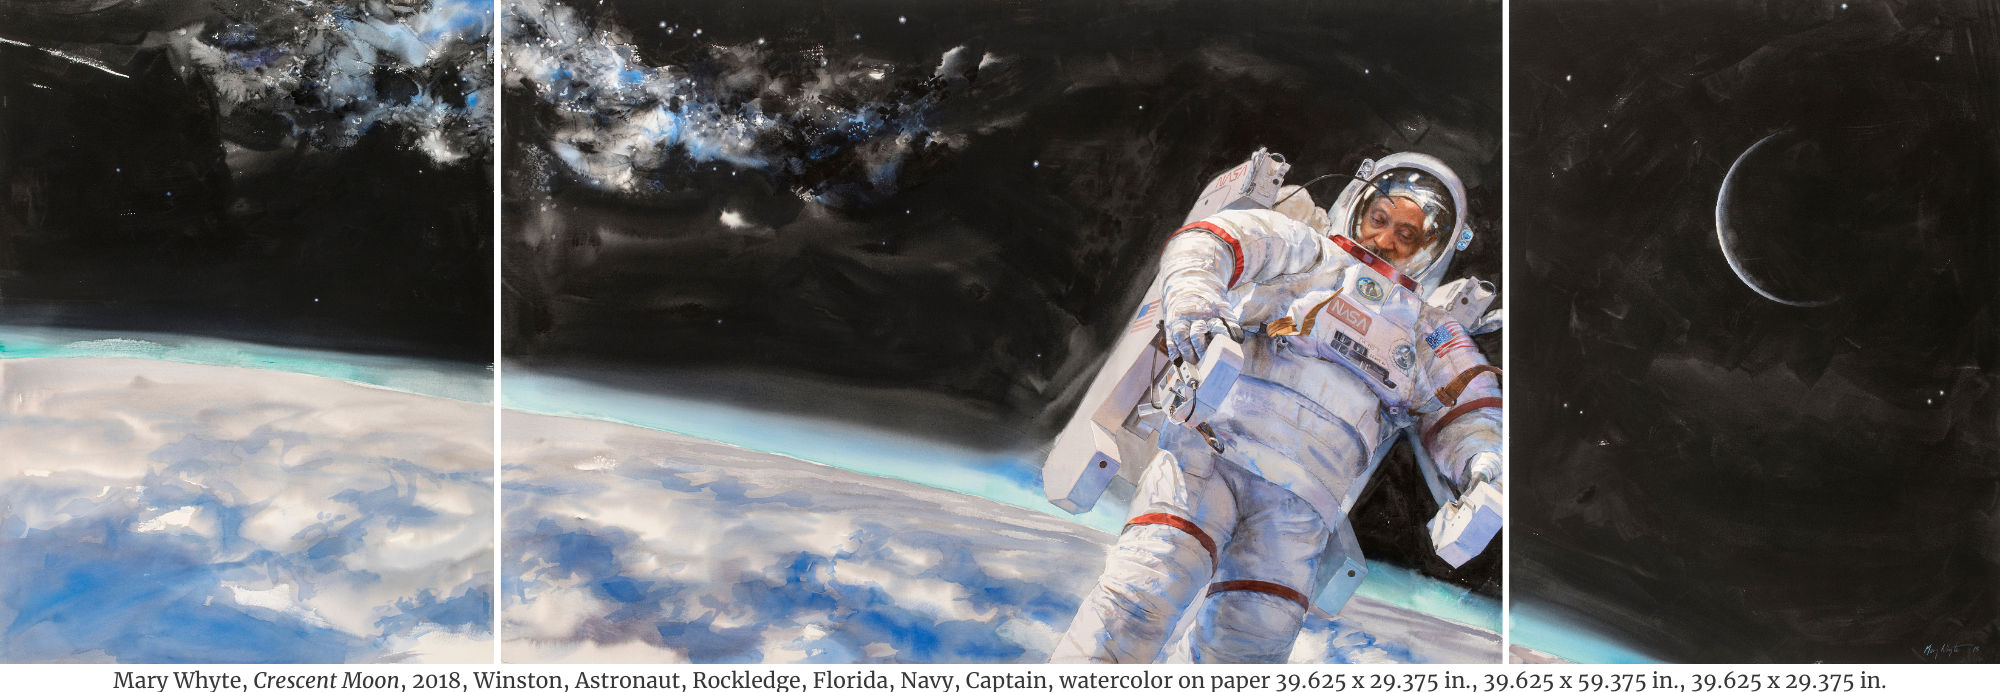 A 3-part watercolor painting of an astronaut floating in space with a sliver of the Earth visible across the bottom left